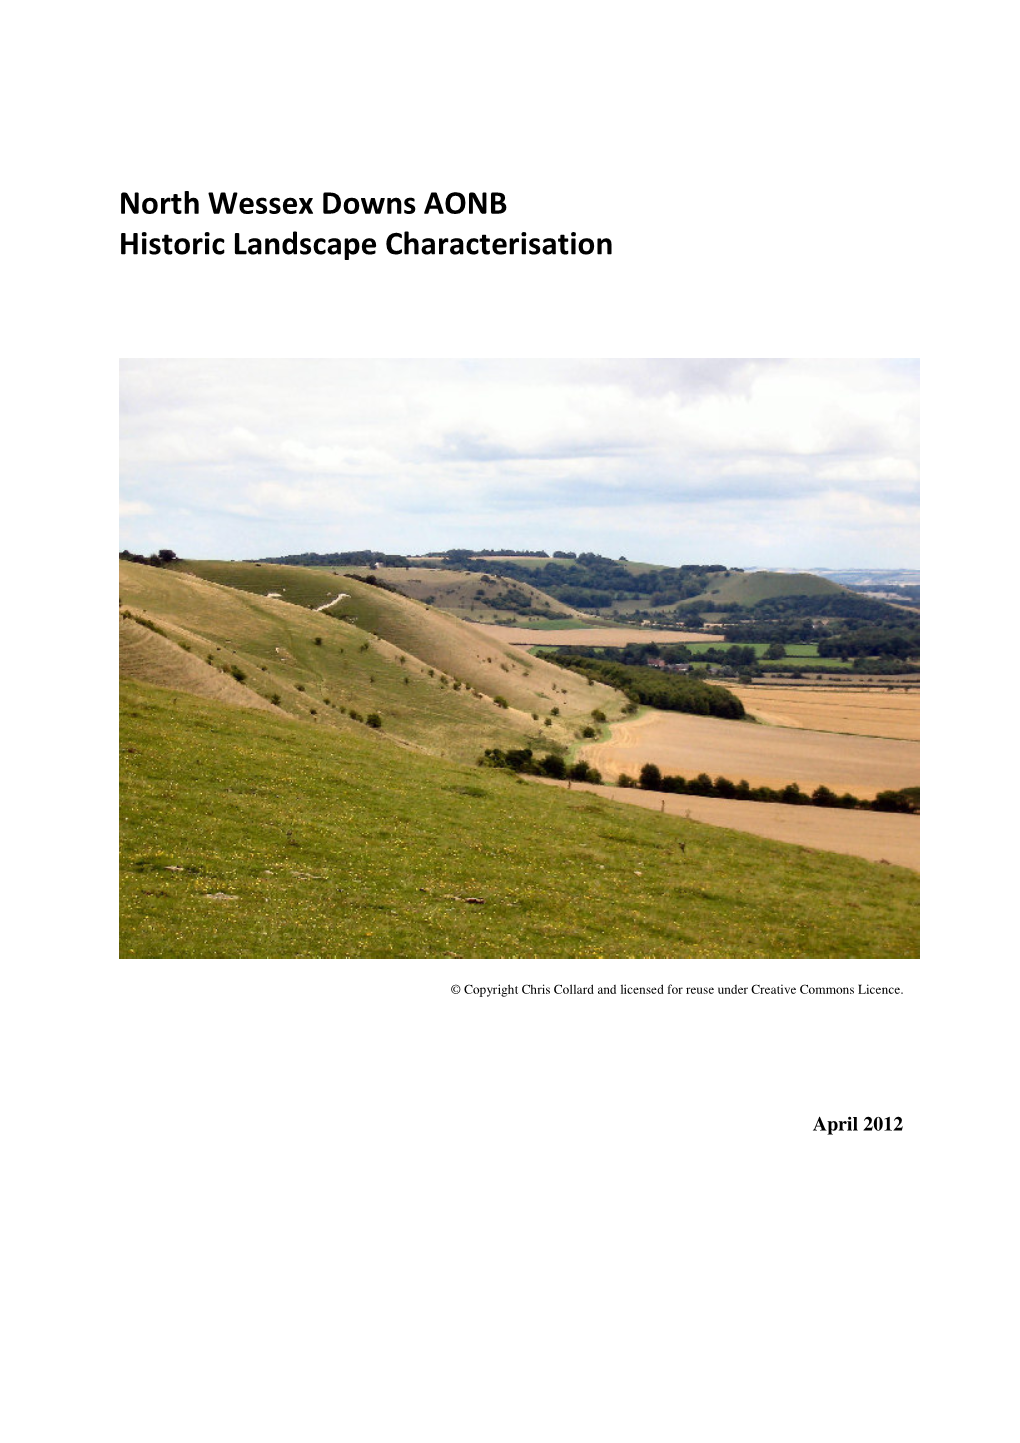 North Wessex Downs AONB Historic Landscape Characterisation